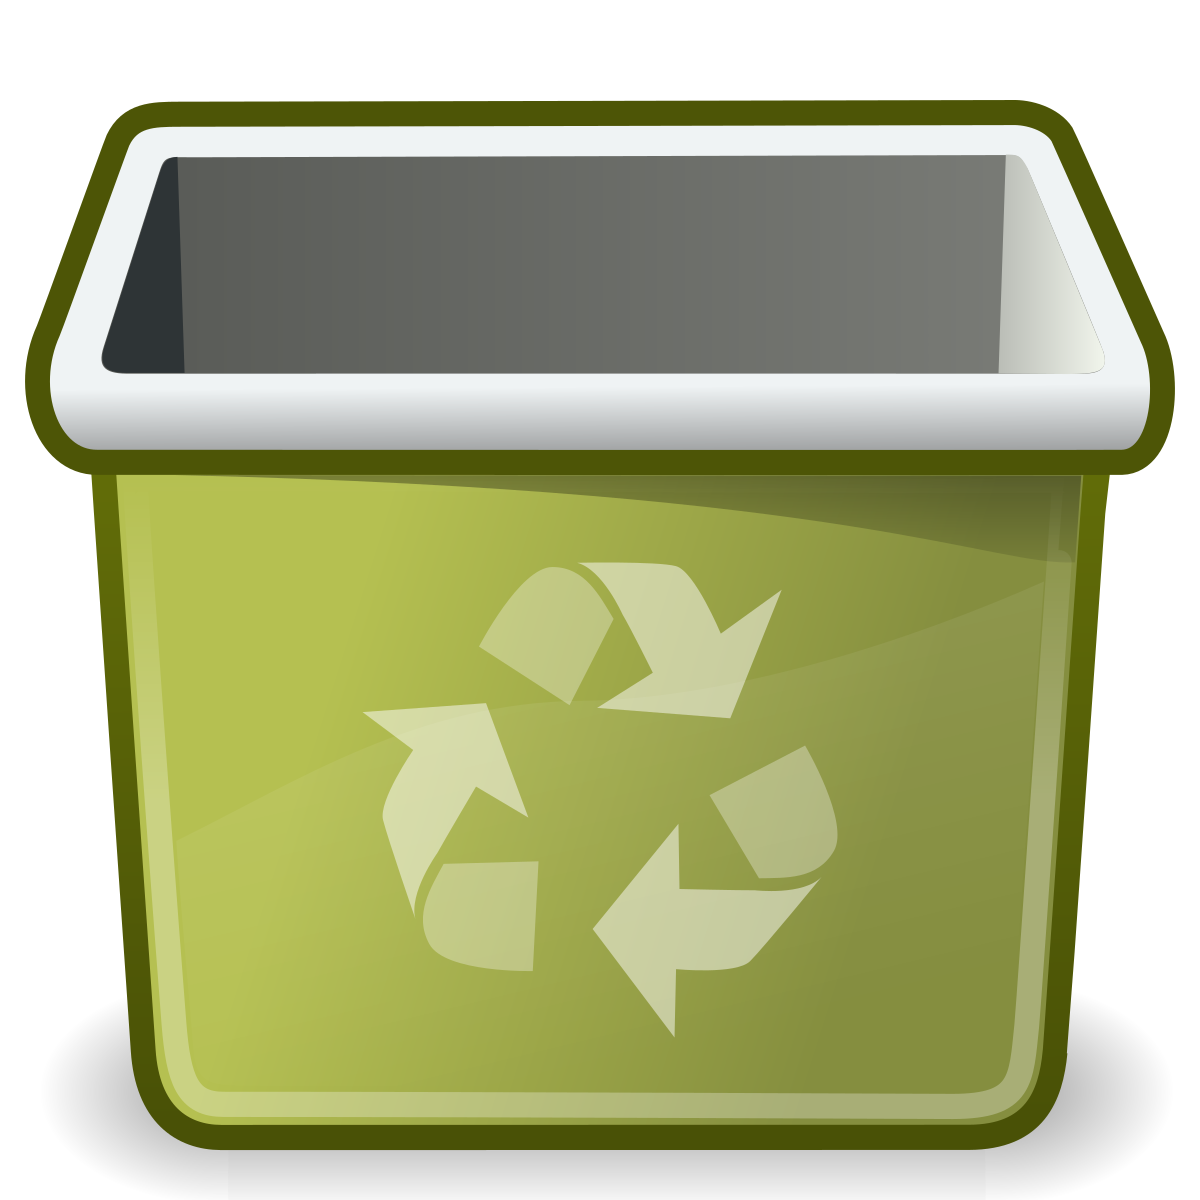 Email inbox with a trash bin icon